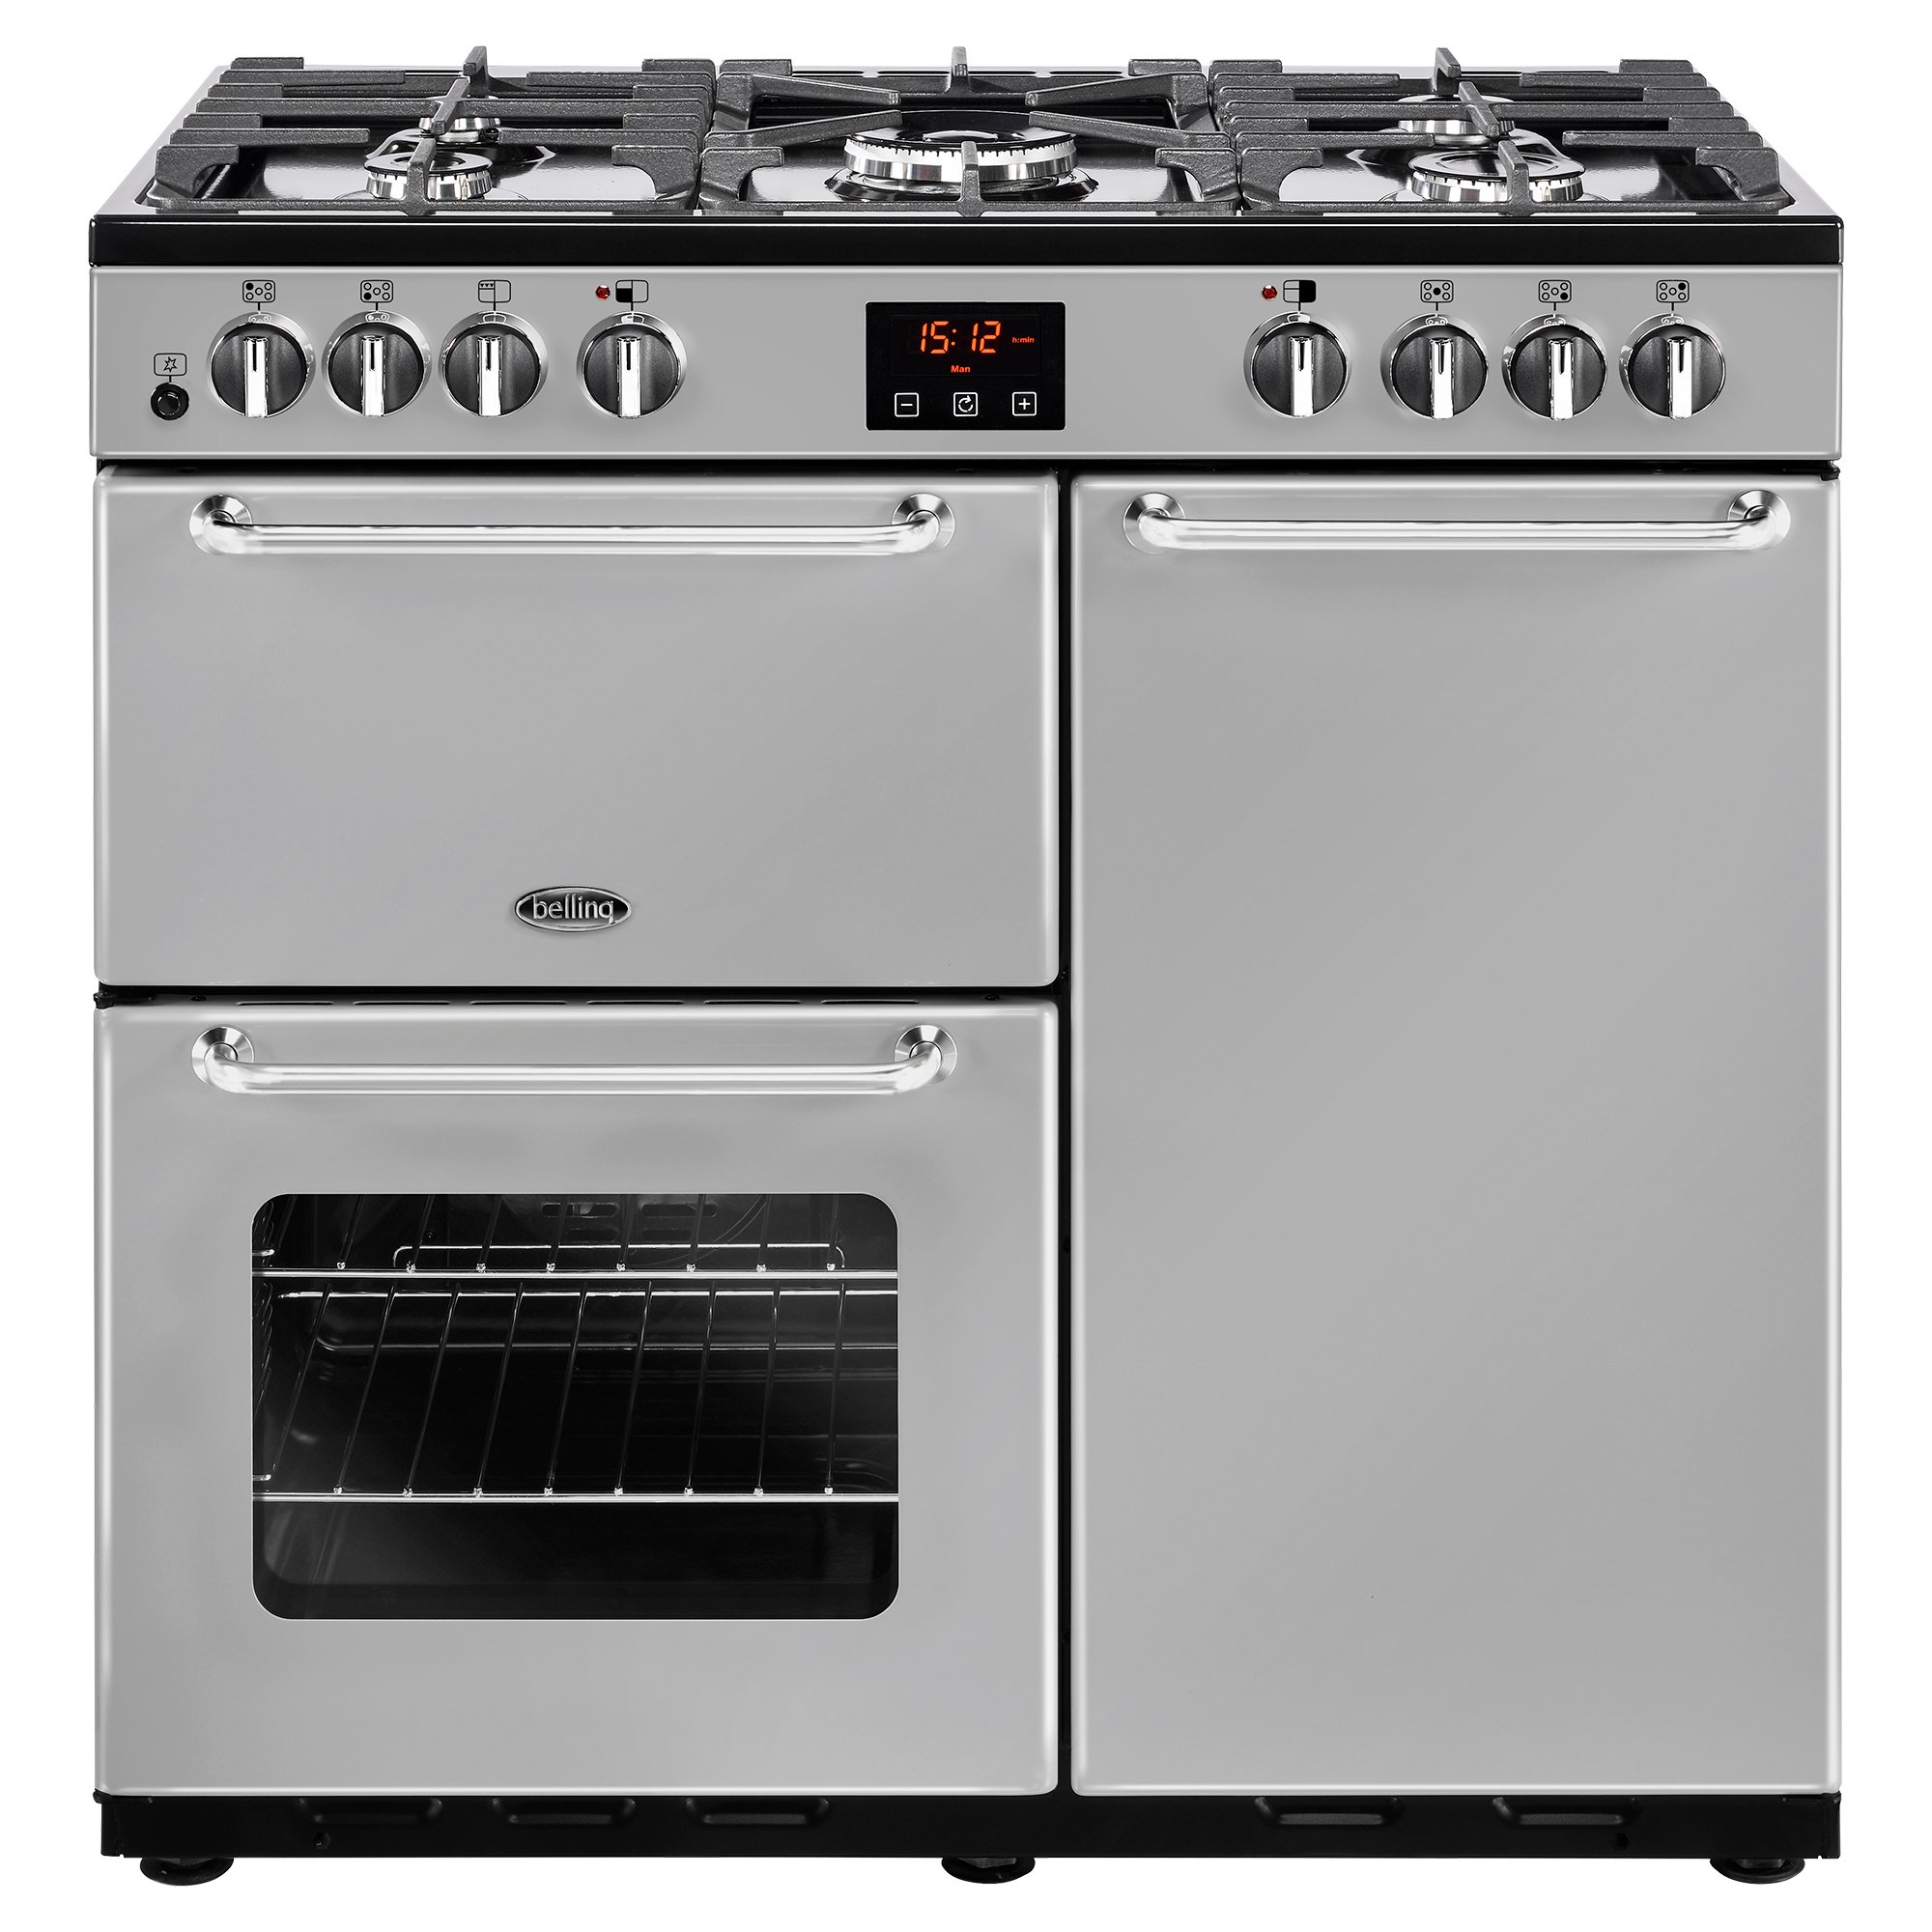 90cm dual fuel range cooker with 5 burner gas hob, variable electric grill, fanned main oven and tall fanned oven.